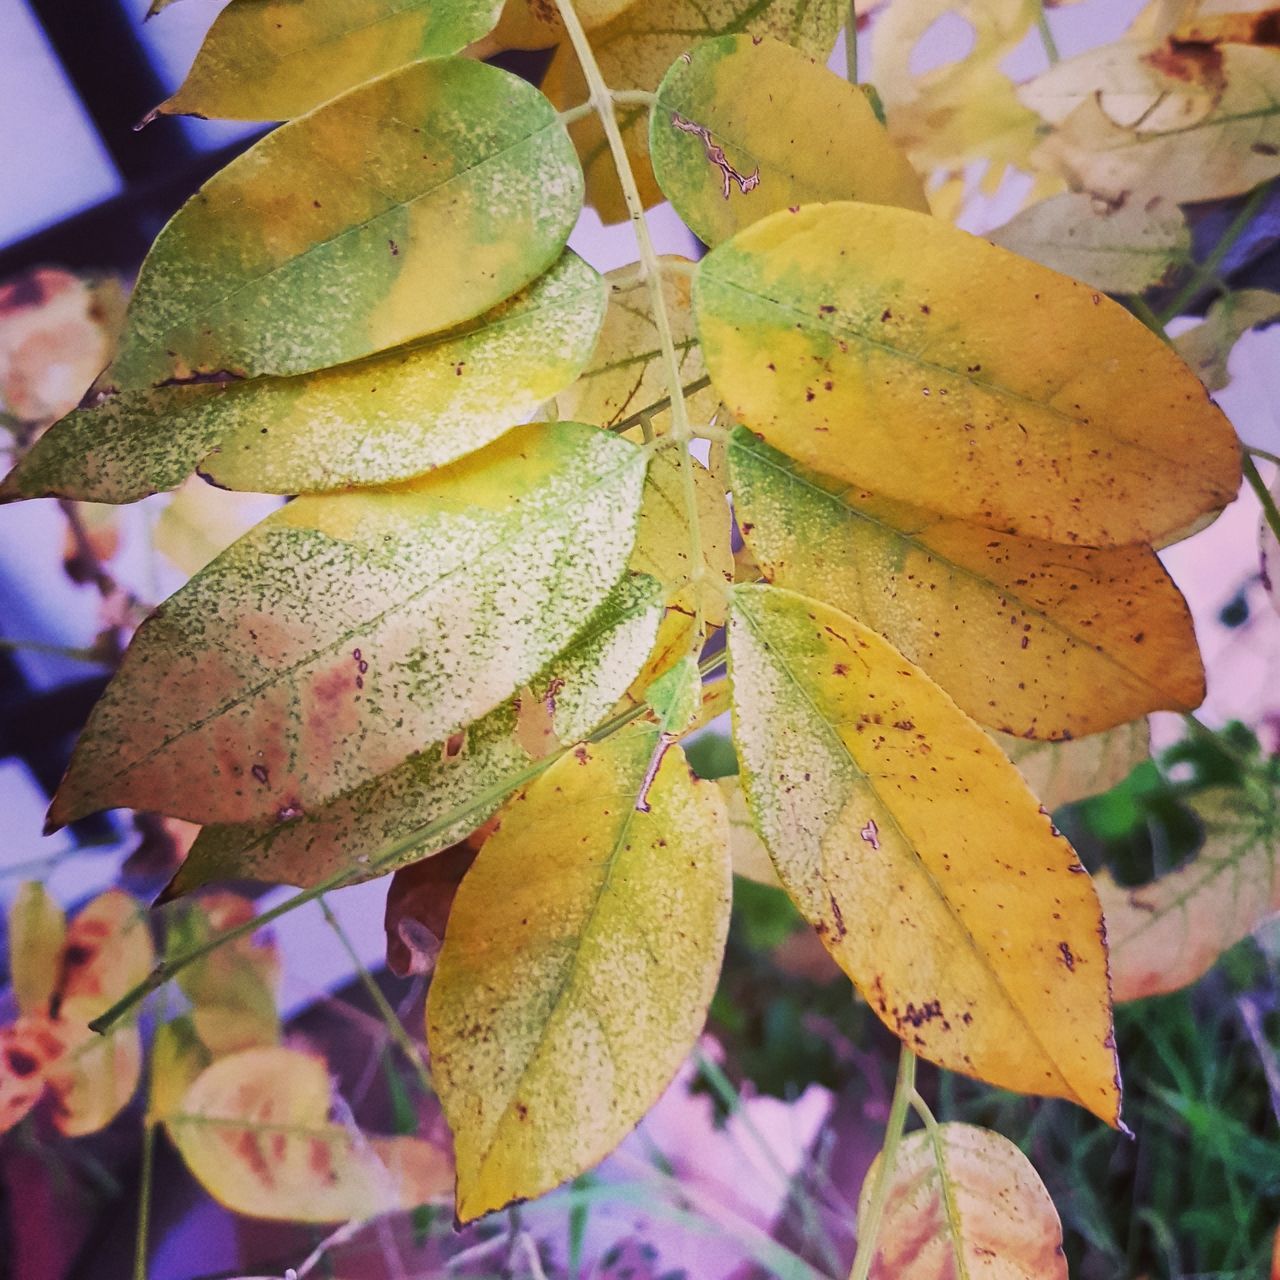 close-up, plant, growth, no people, plant part, leaf, beauty in nature, food and drink, freshness, focus on foreground, day, yellow, nature, food, fruit, tree, healthy eating, outdoors, autumn, green color, leaves